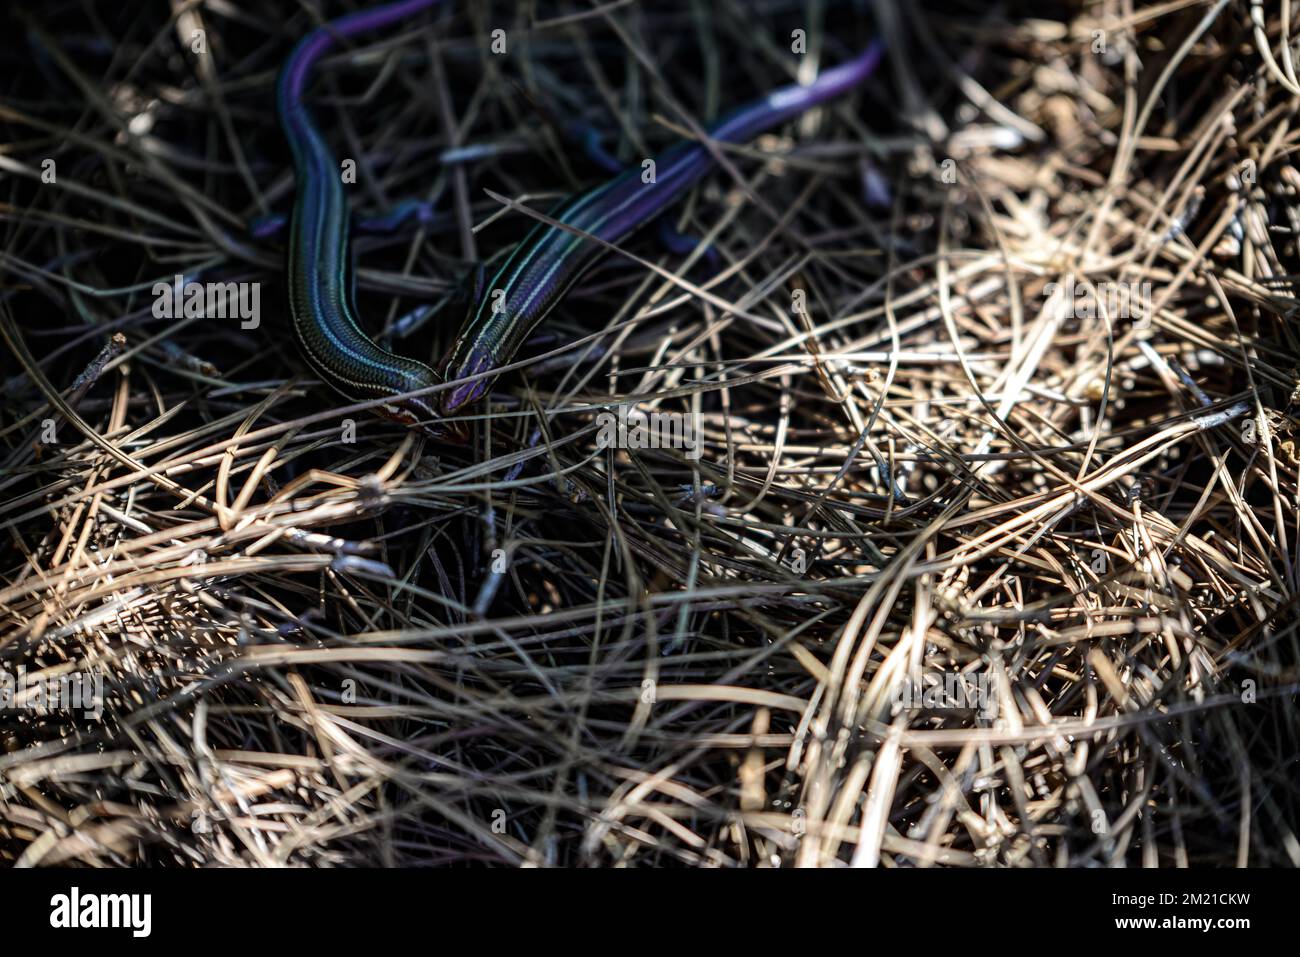 A Skink lizard on wild grass with sunlight Stock Photo